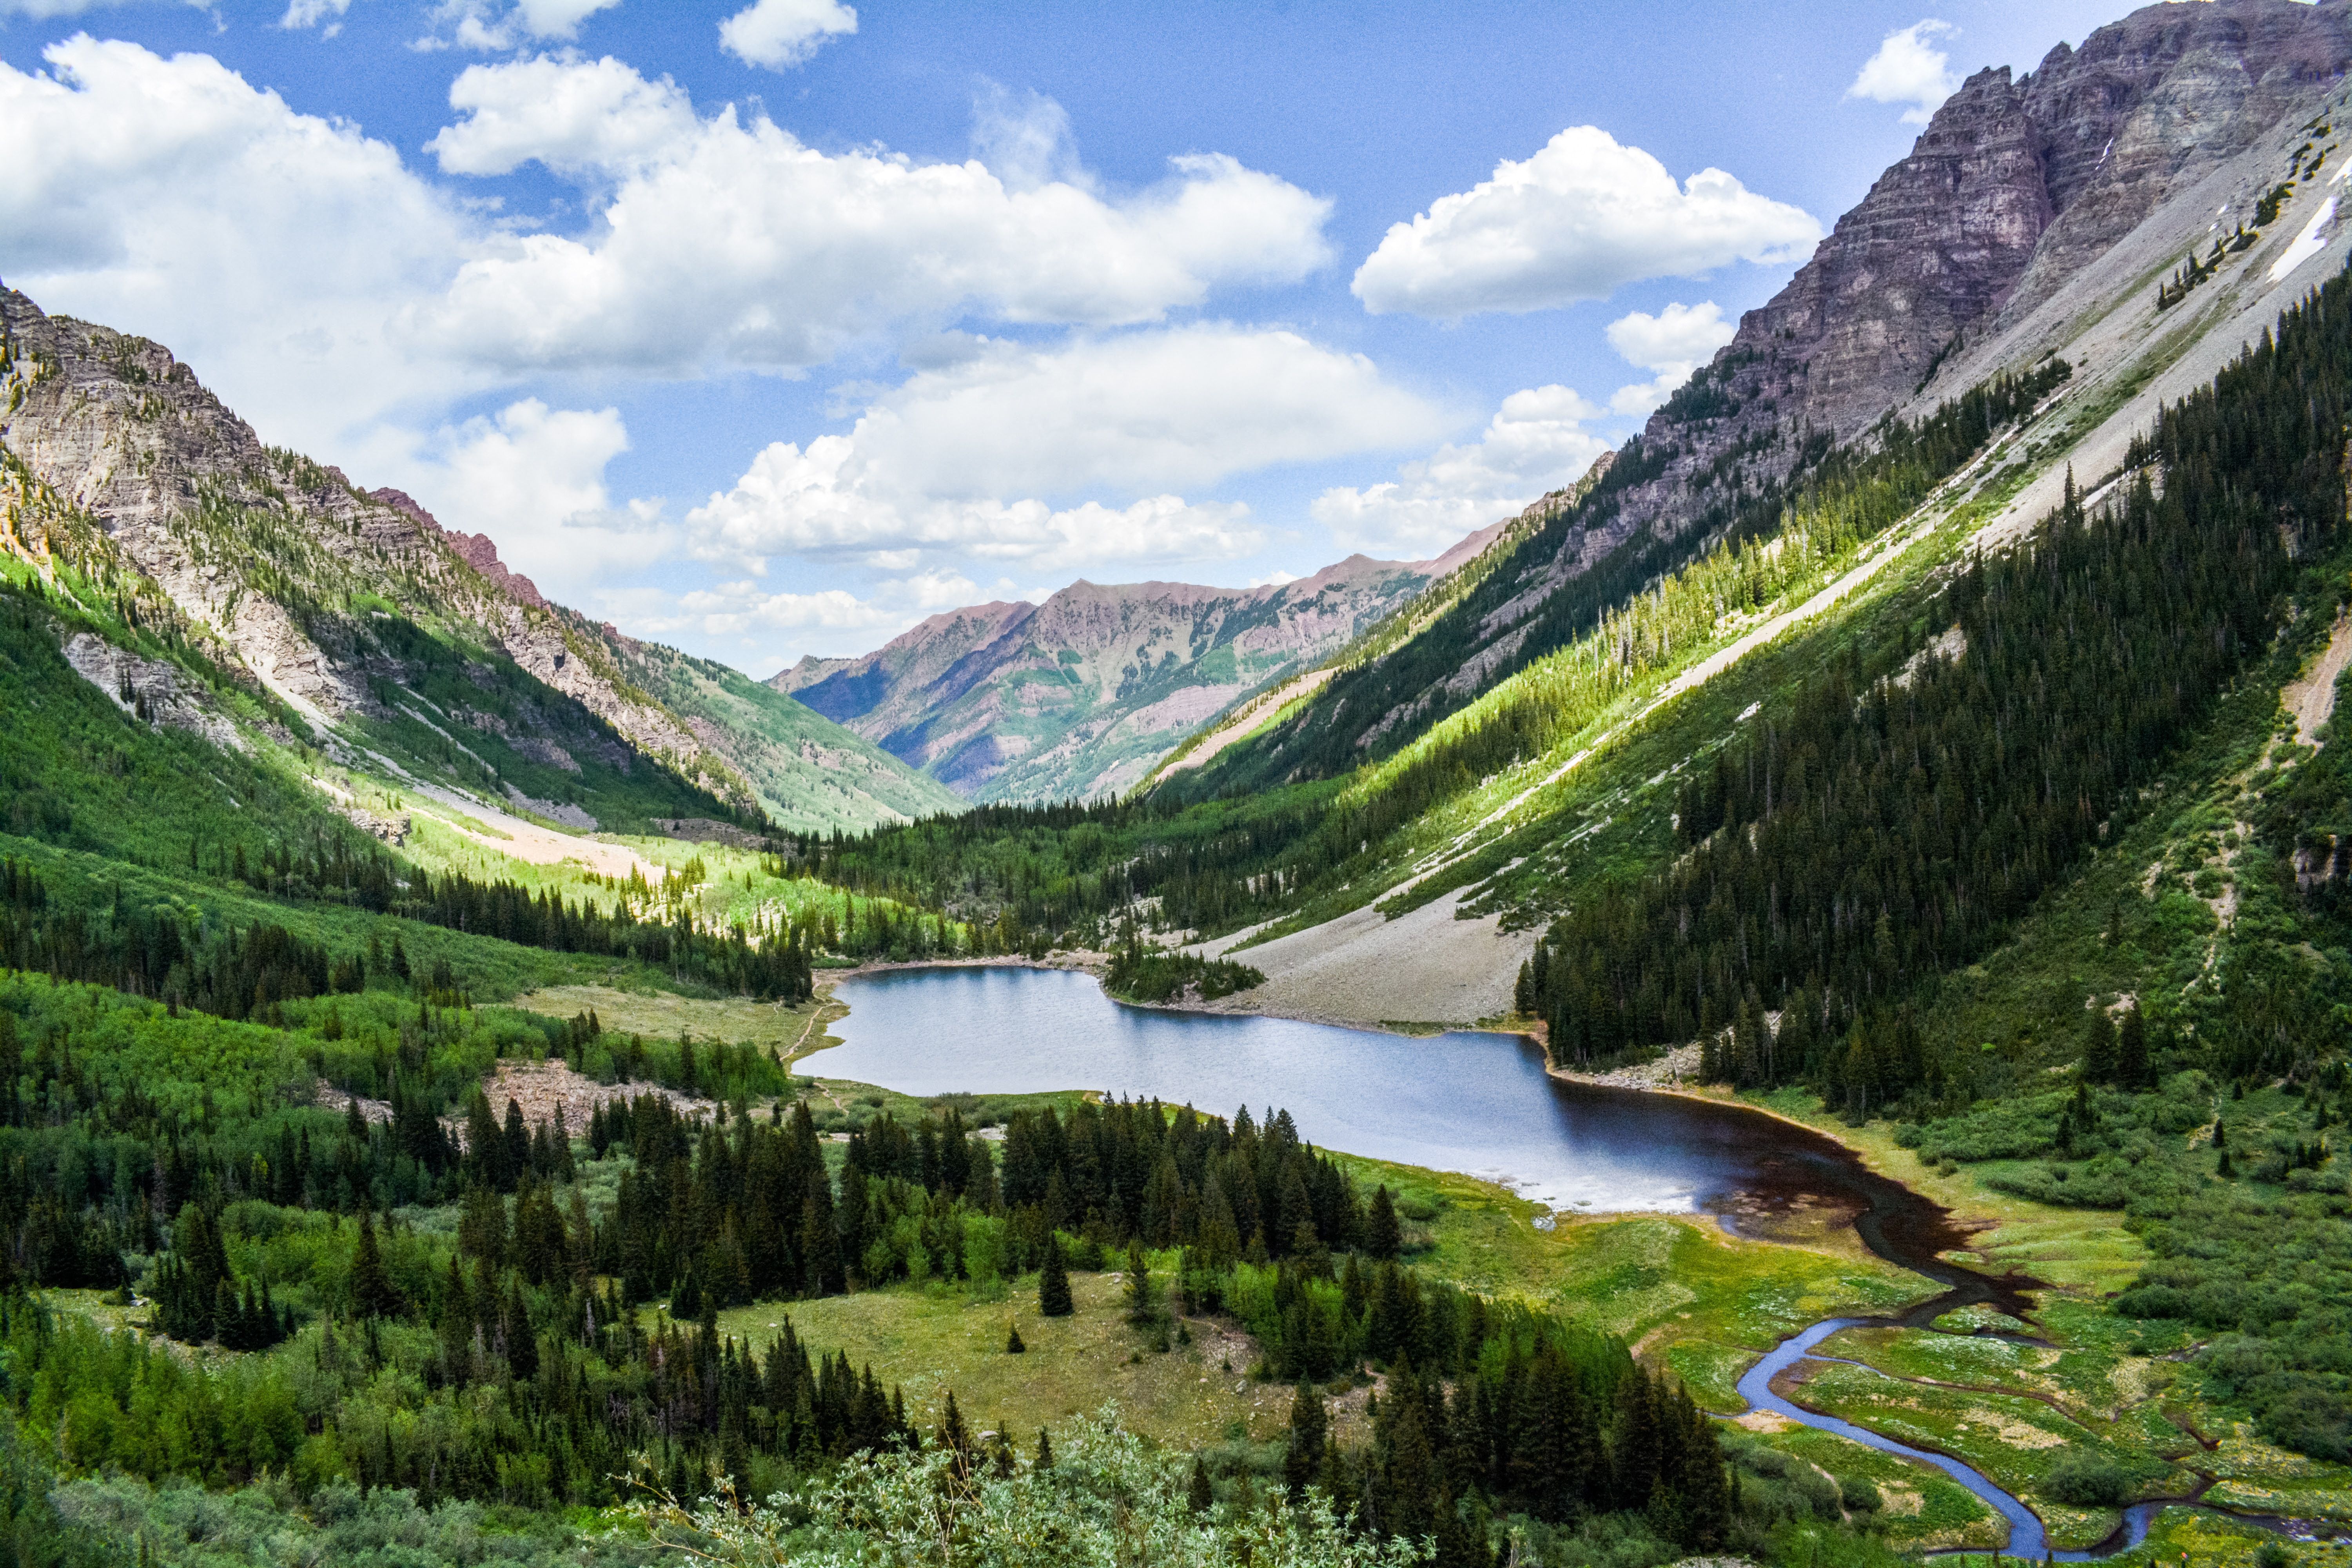 Aspen 4K wallpaper for your desktop or mobile screen free and easy to download